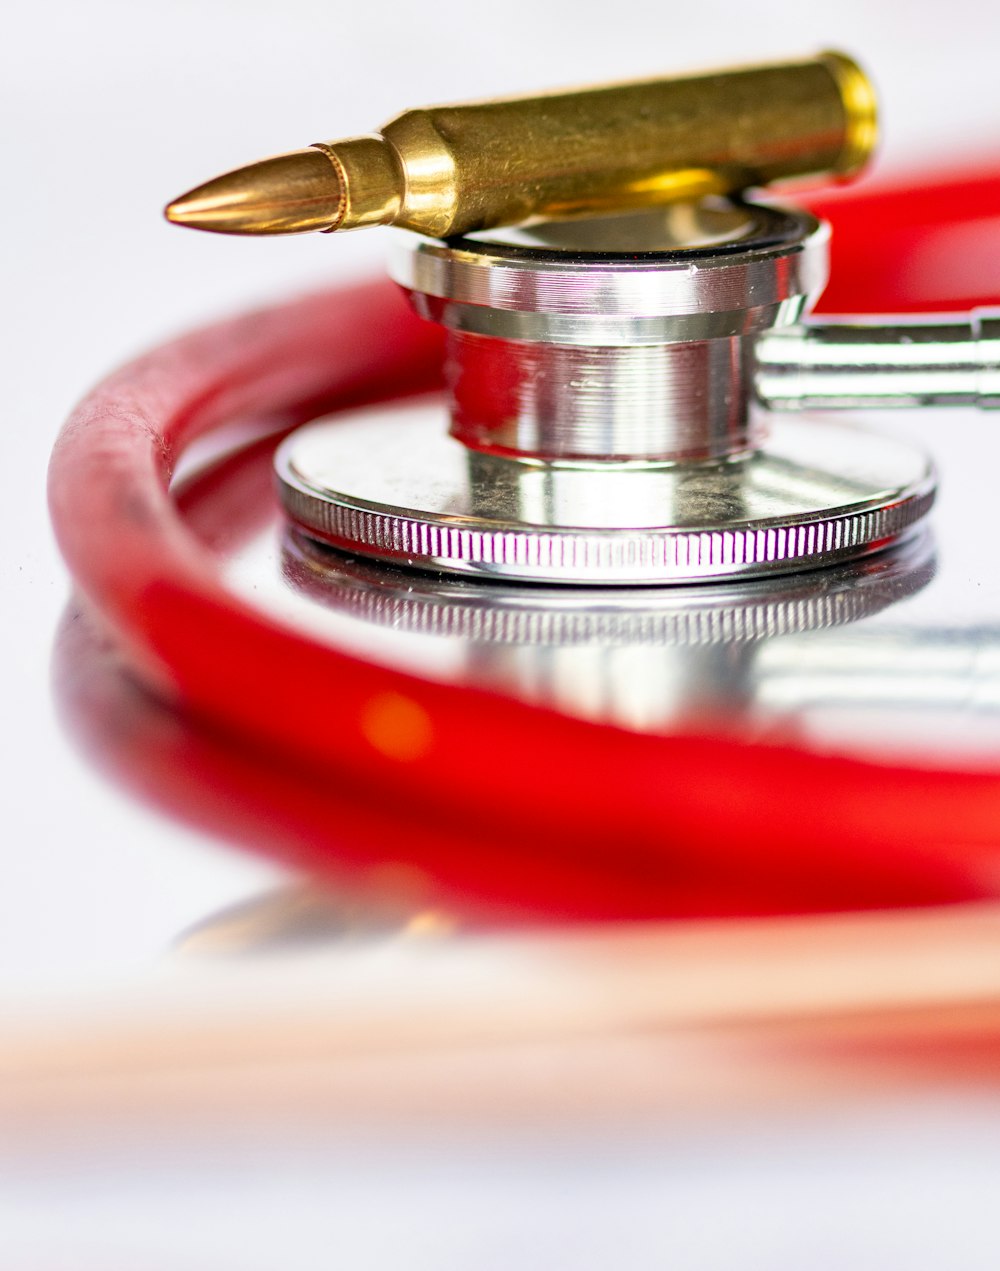 a close up of a stethoscope with a pen on top of it